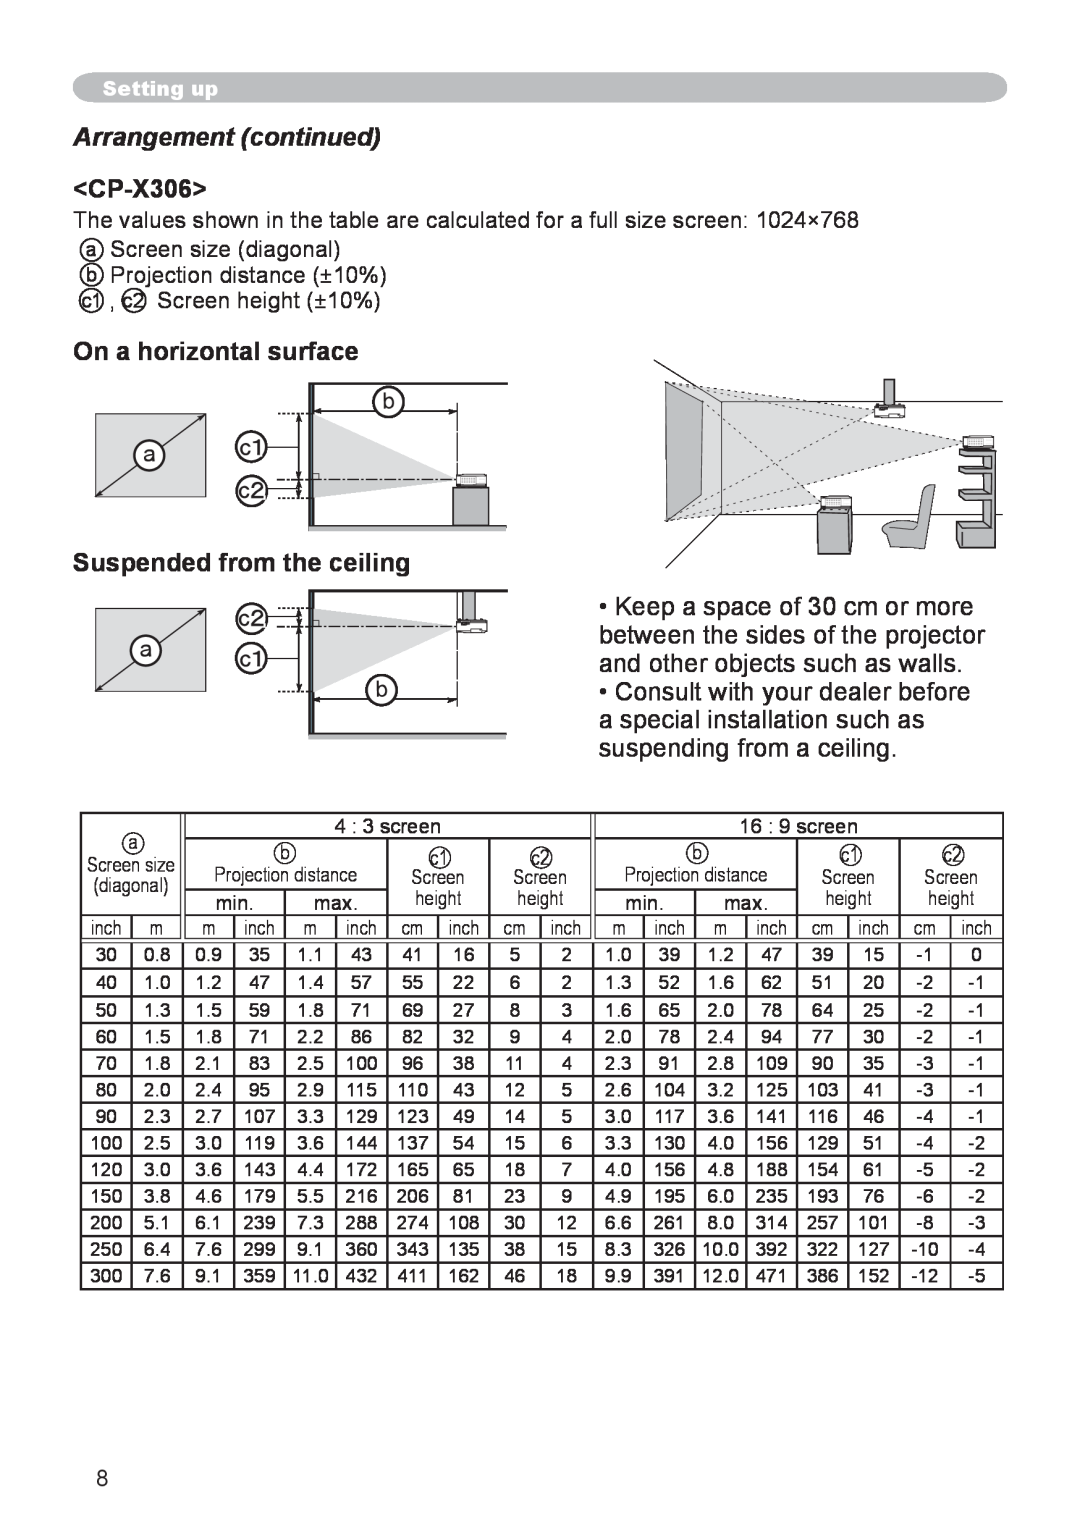 Hitachi CP-X206 user manual Arrangement continued, CP-X306, On a horizontal surface Suspended from the ceiling, Setting up 